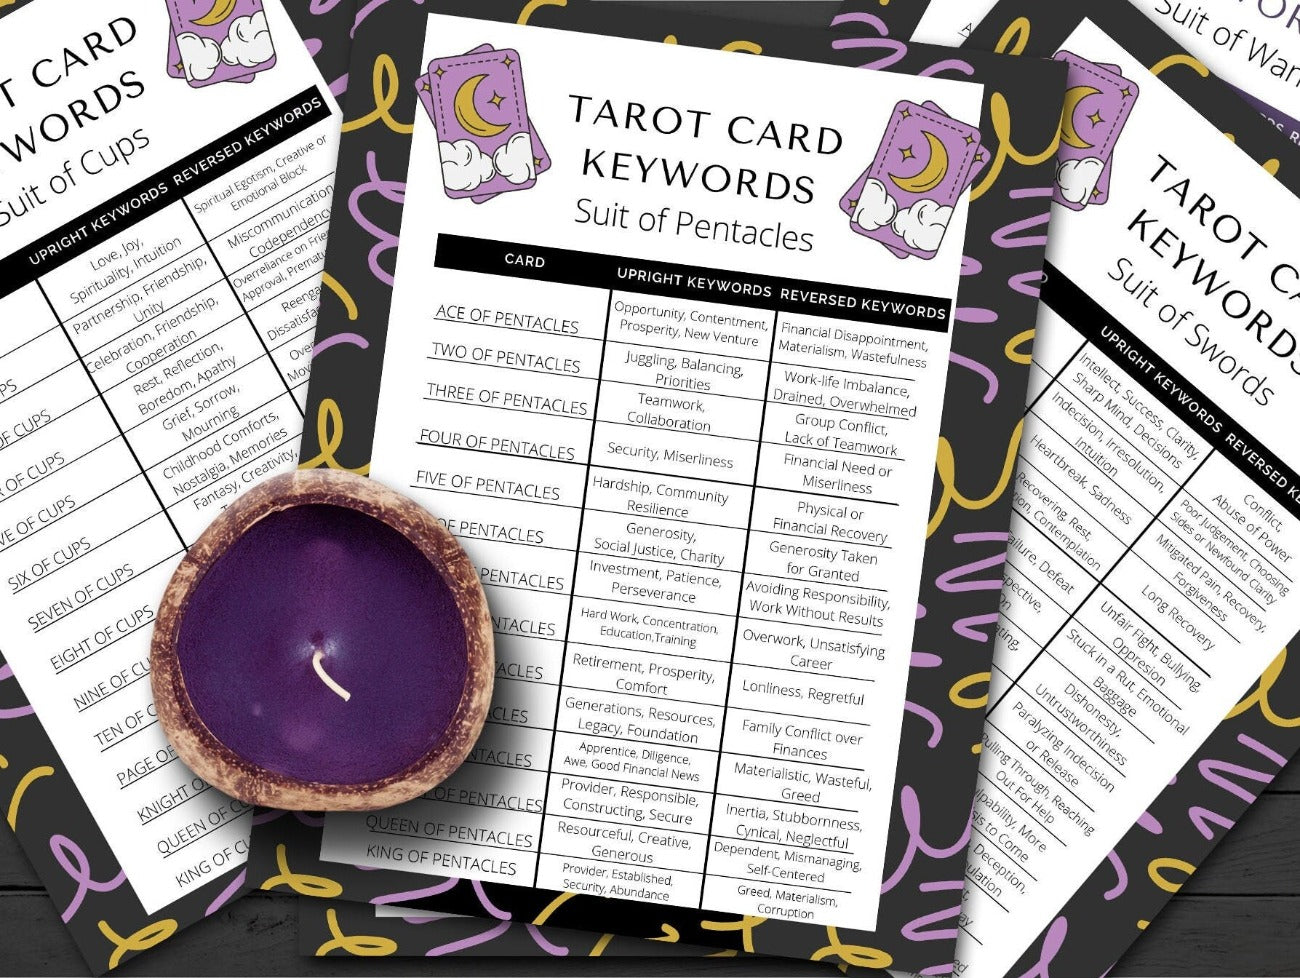 TAROT CHEAT SHEETS 5 Pages, Witchcraft Wicca 78 tarot card quick guide printable, Tarot beginner keywords reference Guide, Learn the Tarot - Morgana Magick Spell